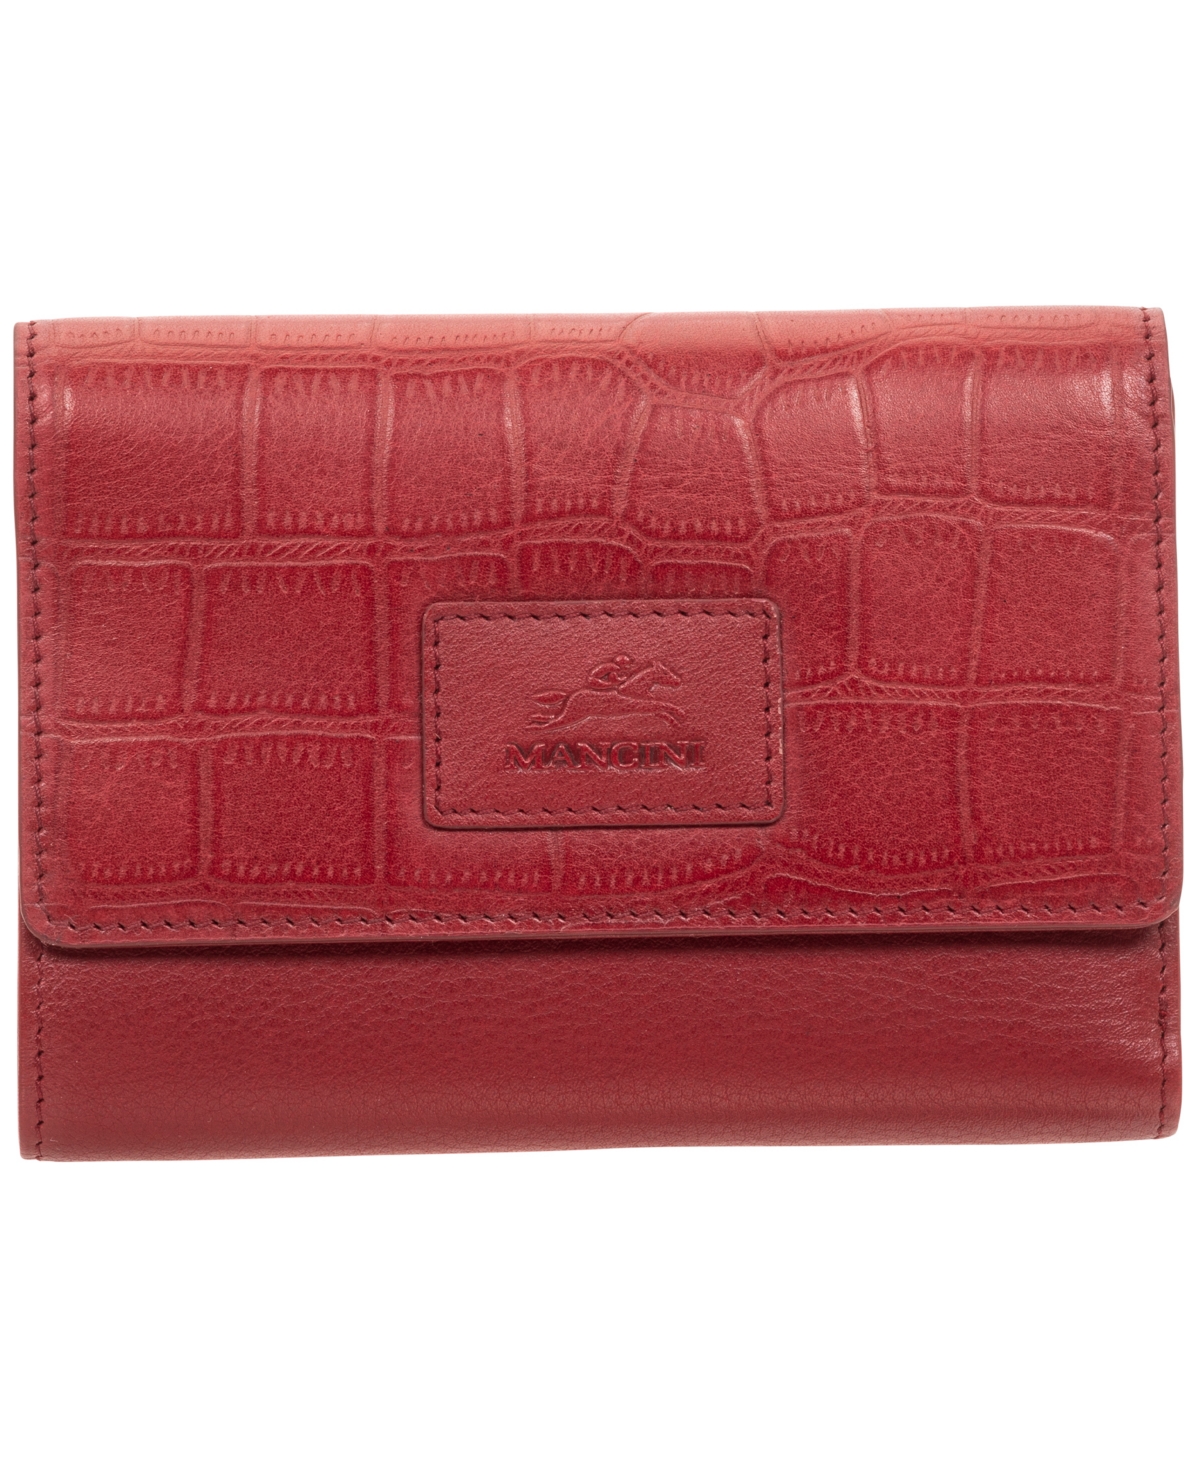 Women's Croco Collection Rfid Secure Mini Clutch Wallet - Red